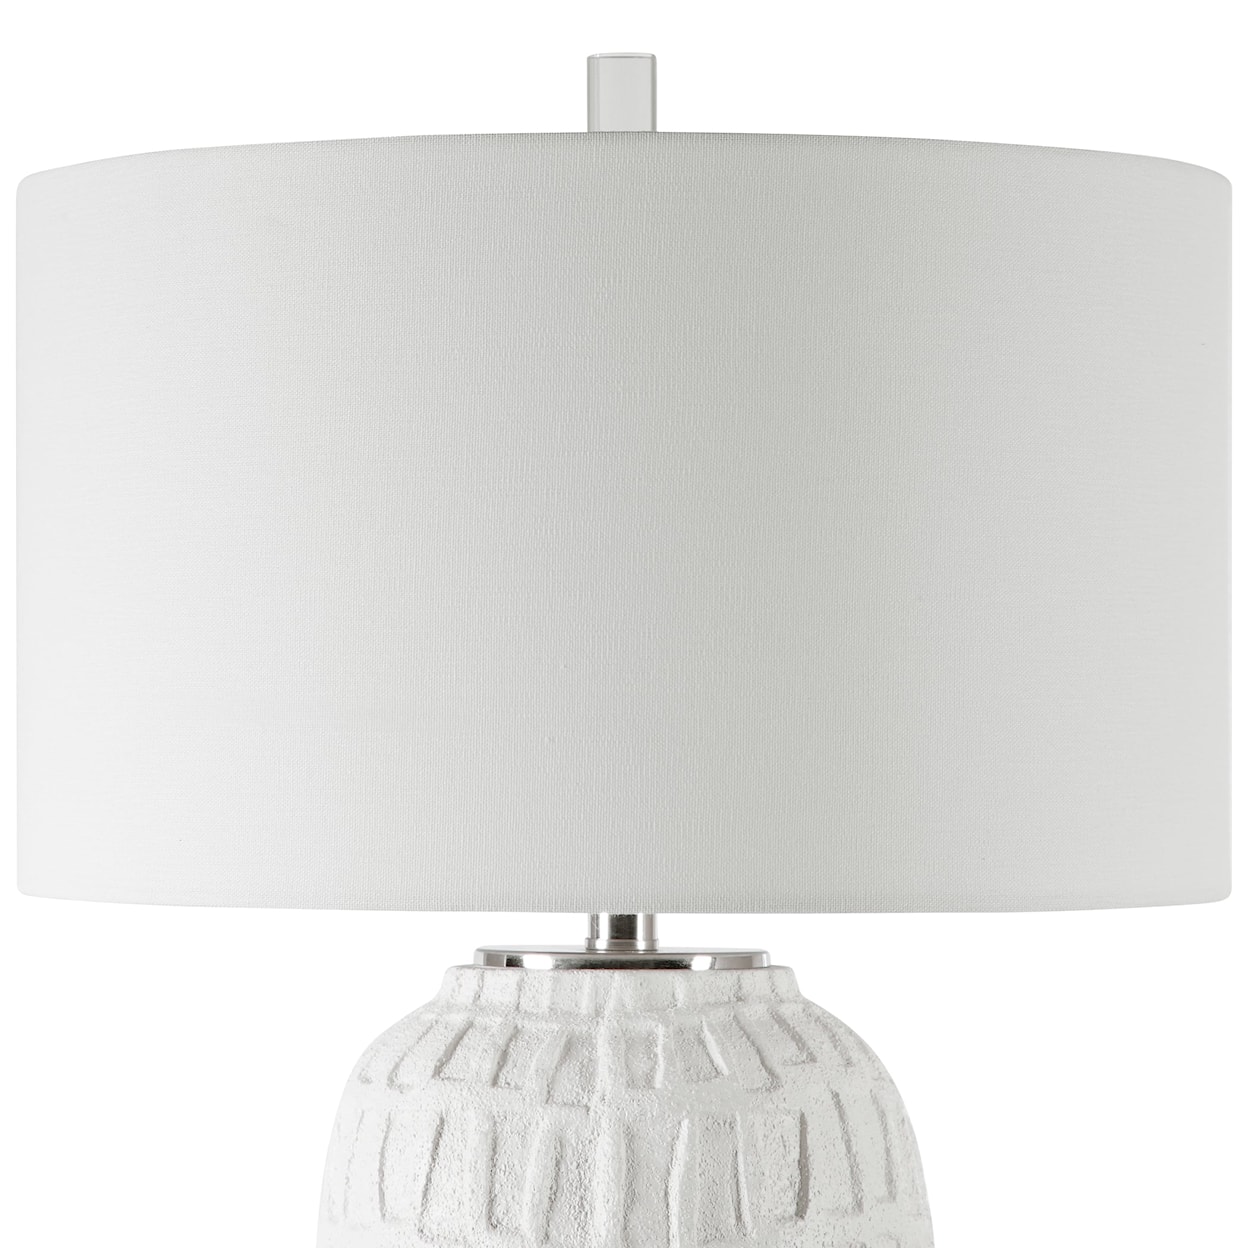 Uttermost Table Lamps Caelina Textured White Table Lamp